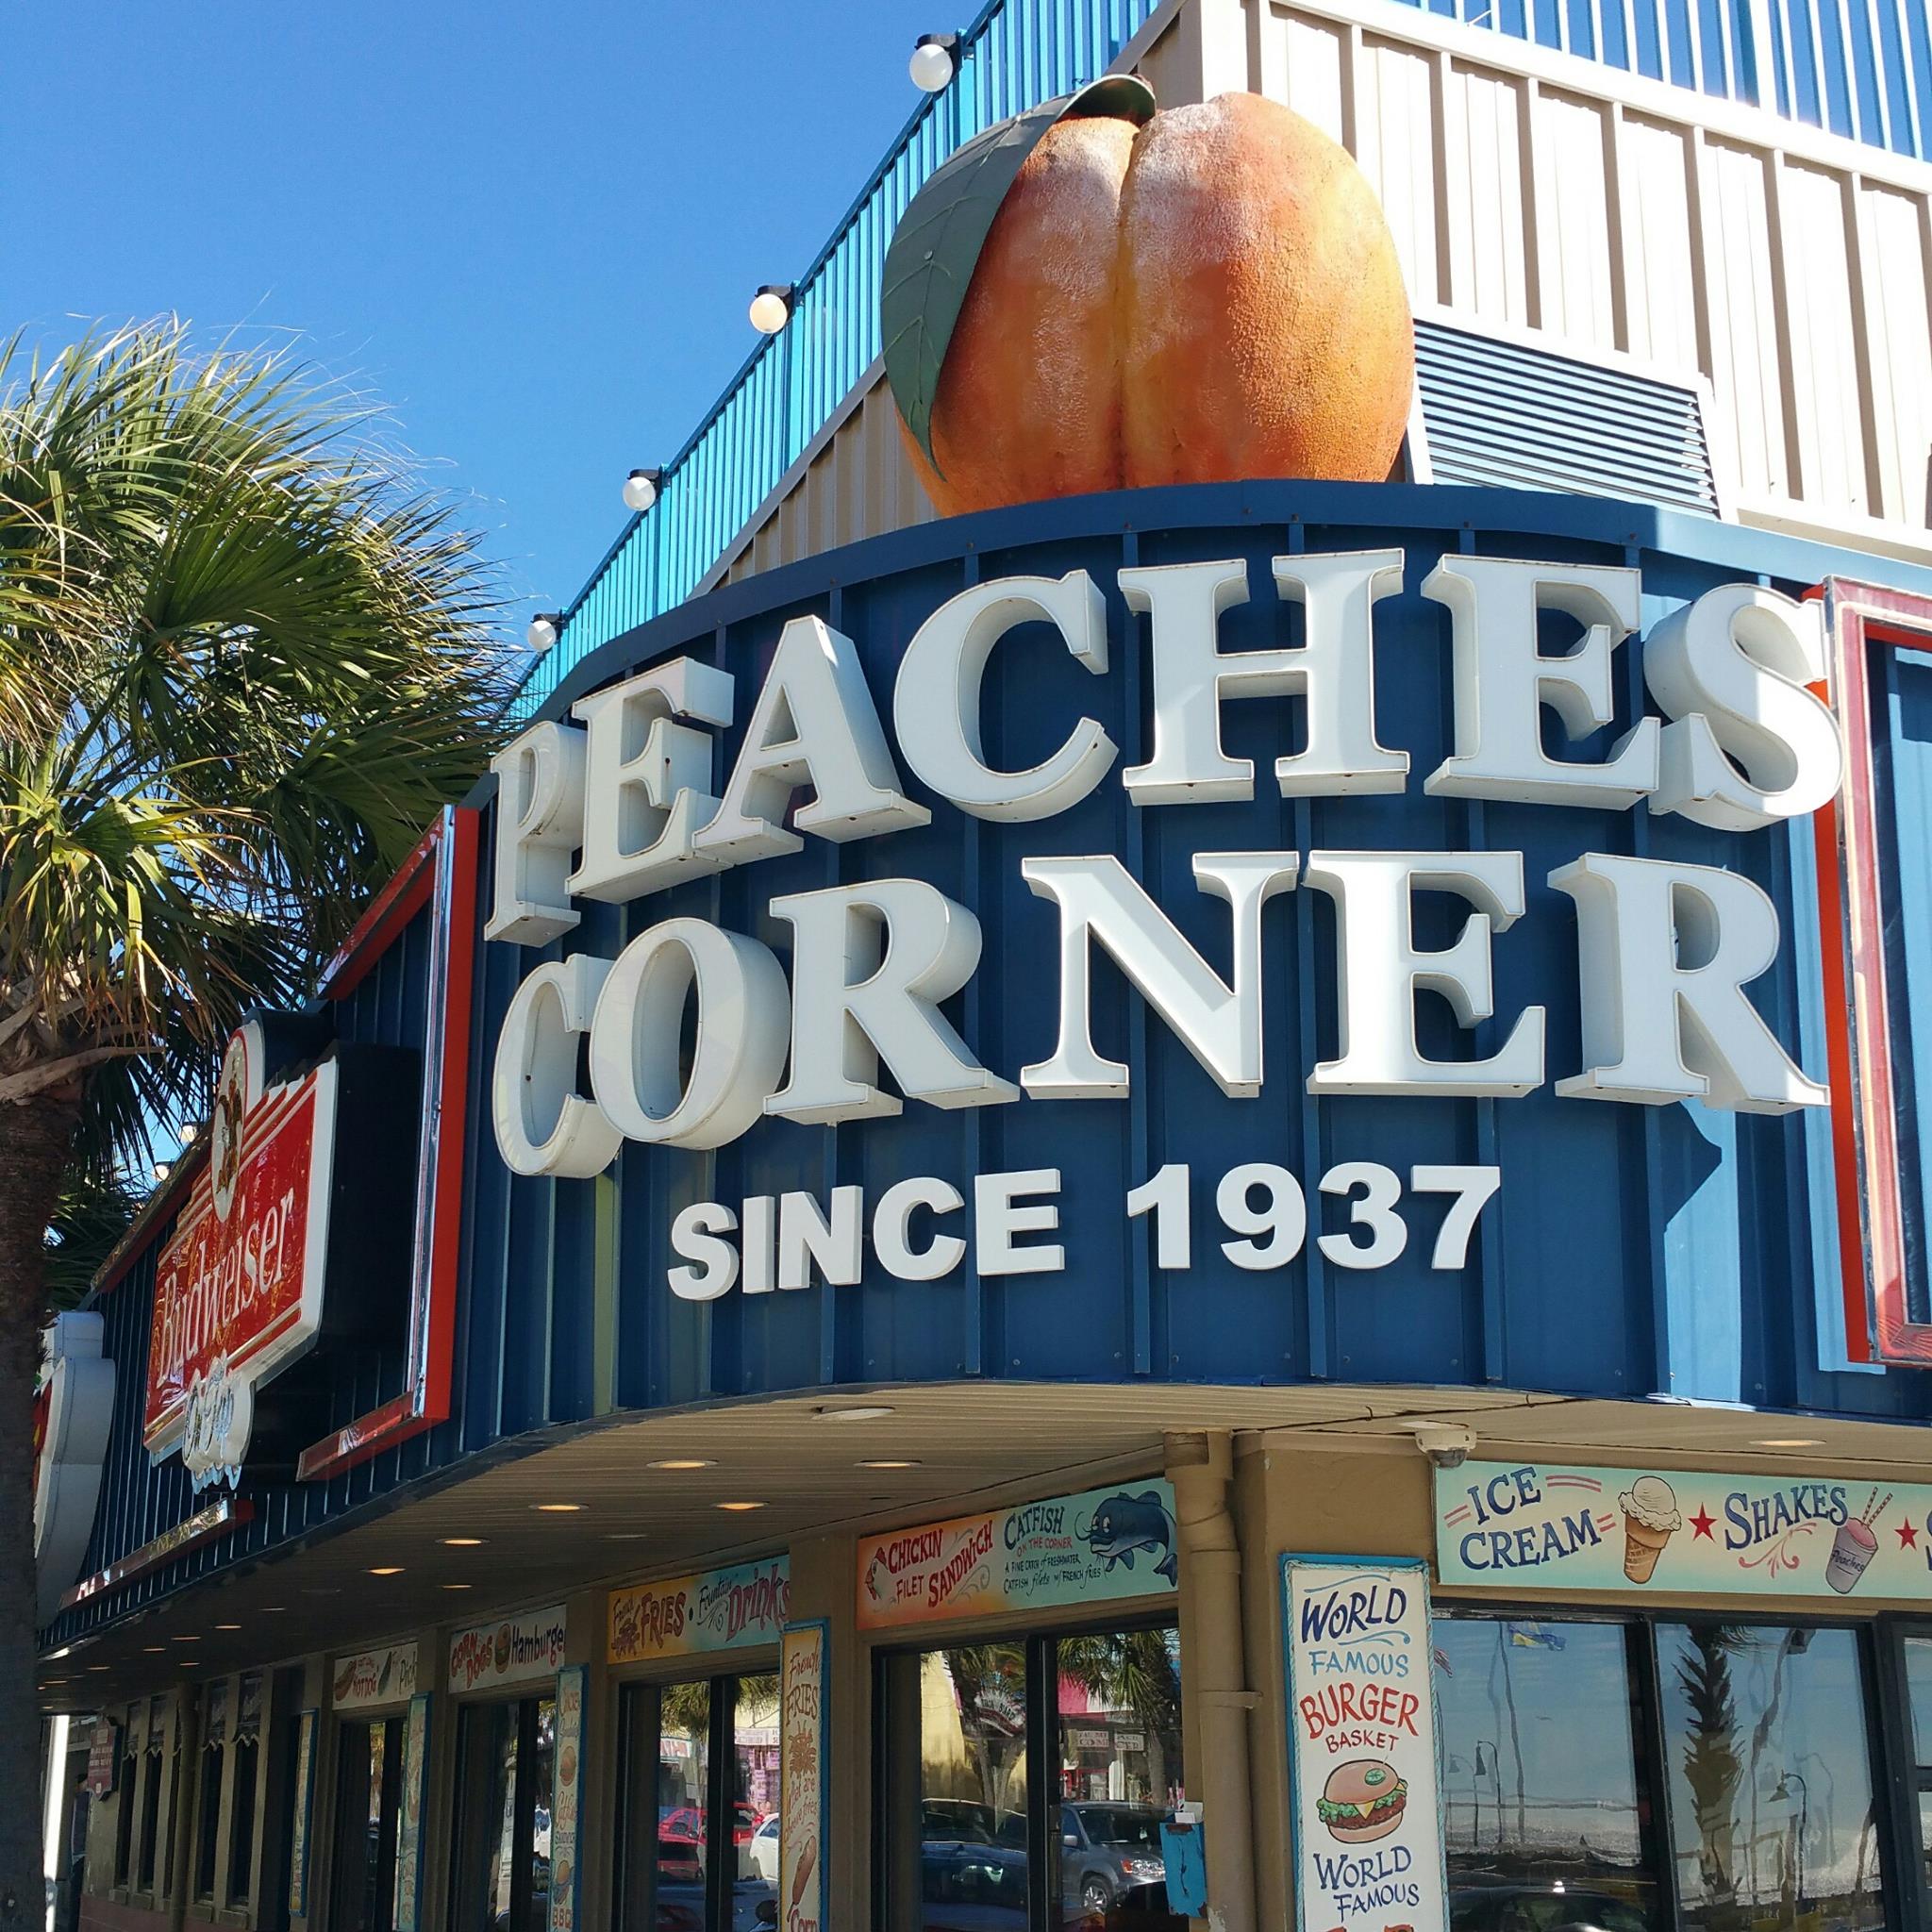 Peaches Corner on 9th Ave is a staple of the Myrtle Beach landscape.